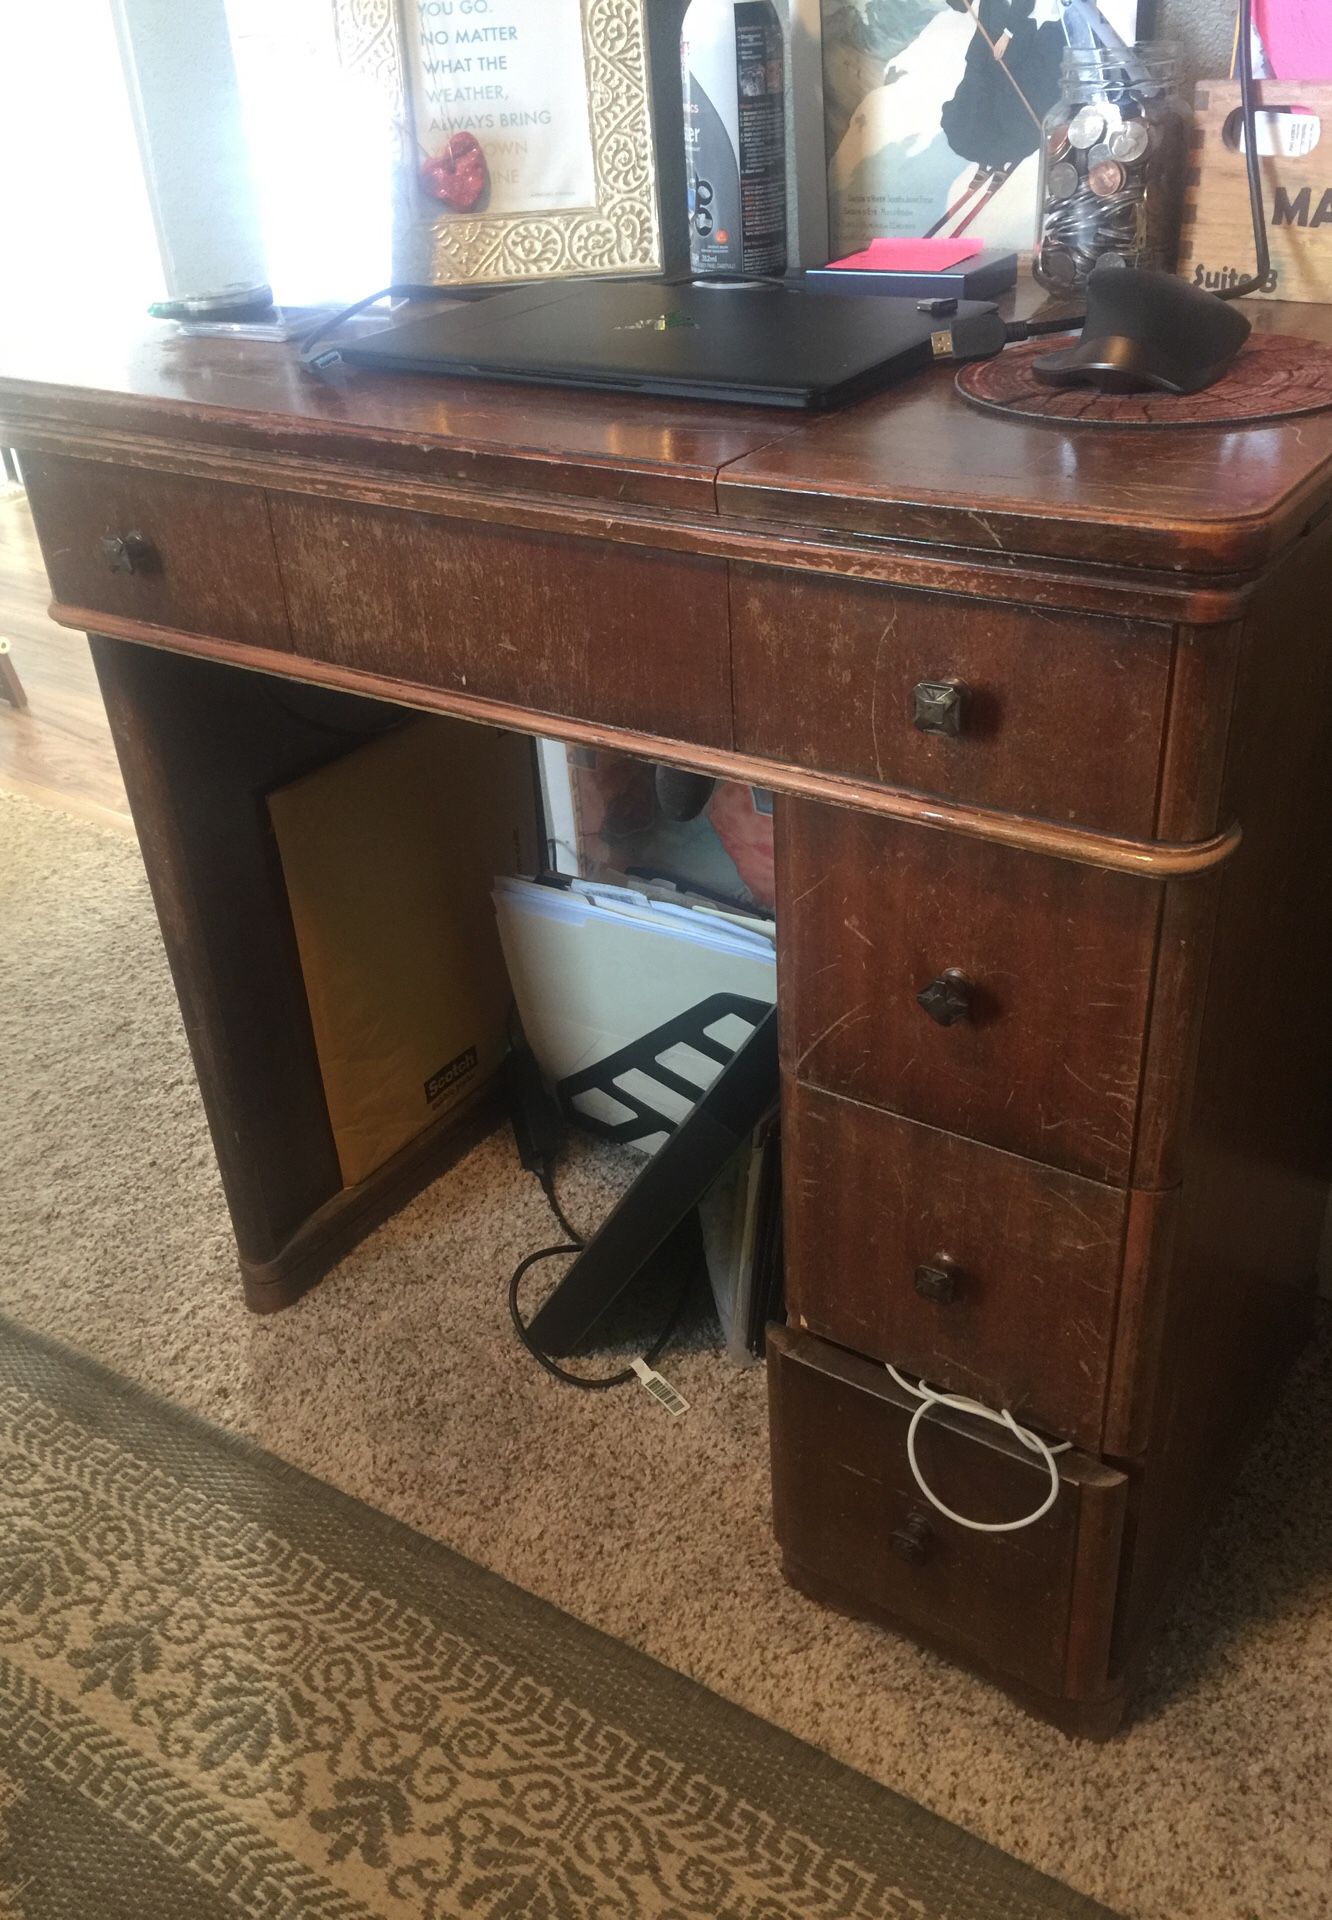 Antique sewing machine desk - 1930s great condition